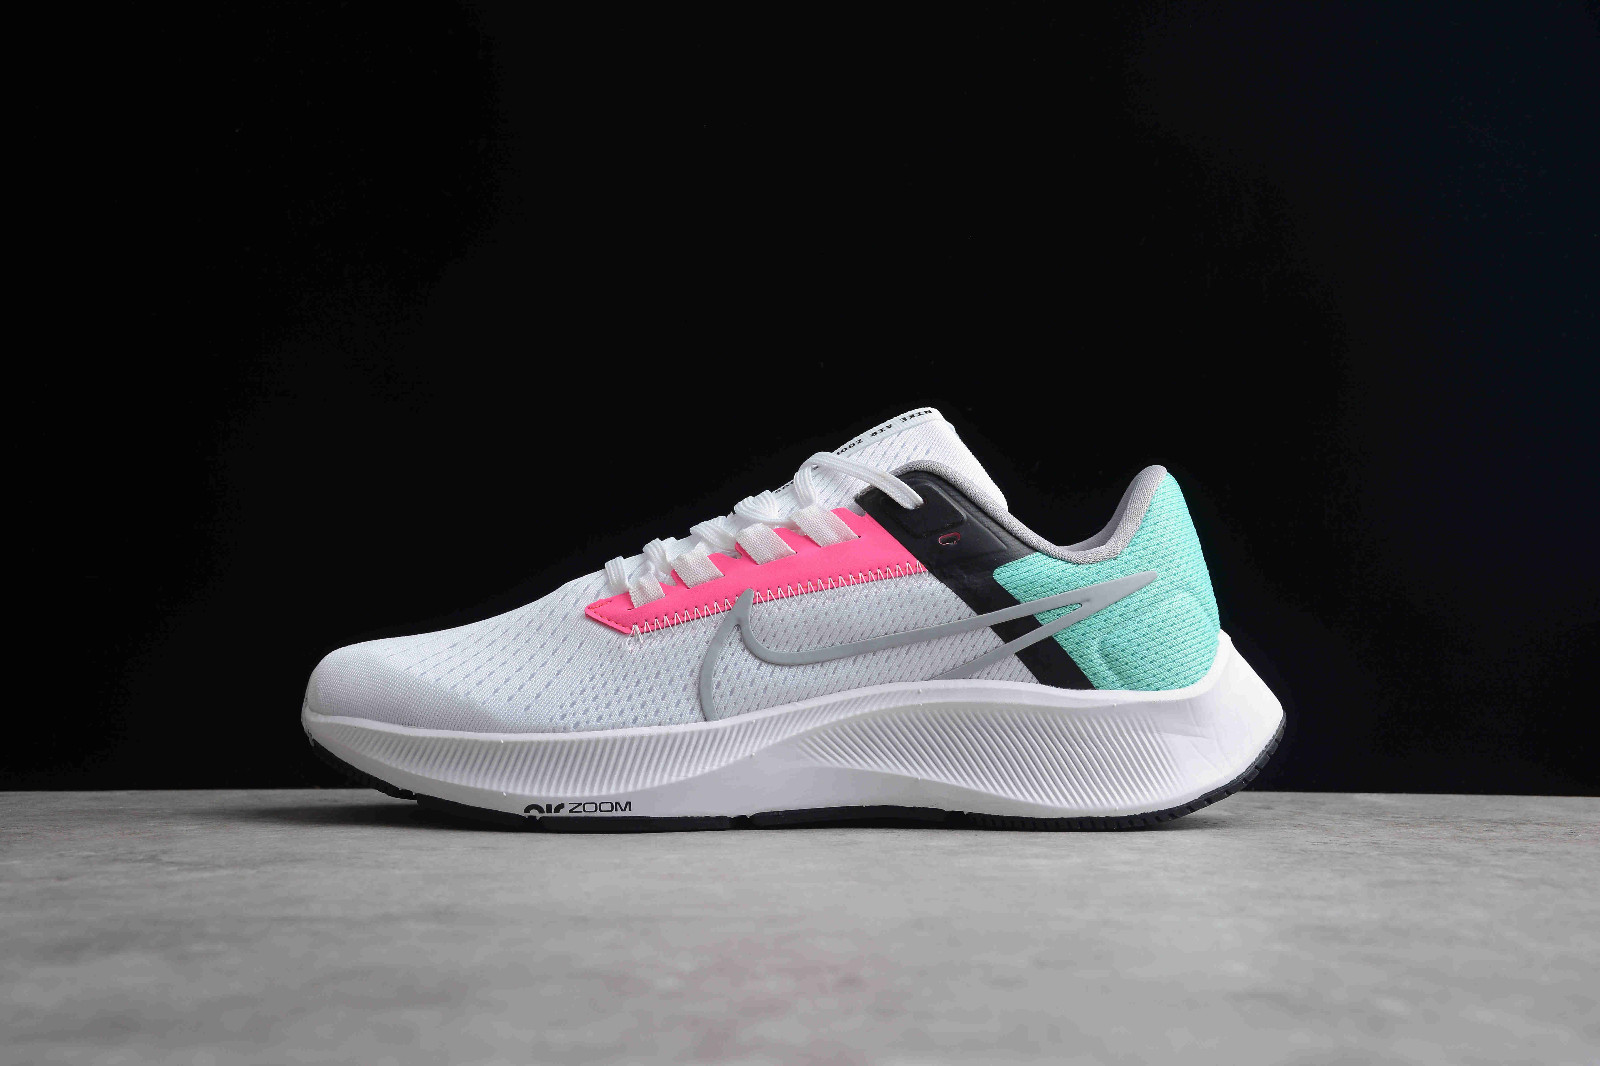 popular Auckland Violín Nike nike sb koston hypervulc grey blue suit black South Beach White Pink  Blue CW7356 - 102 - cool yellow nike heels boots for women on sale -  GmarShops